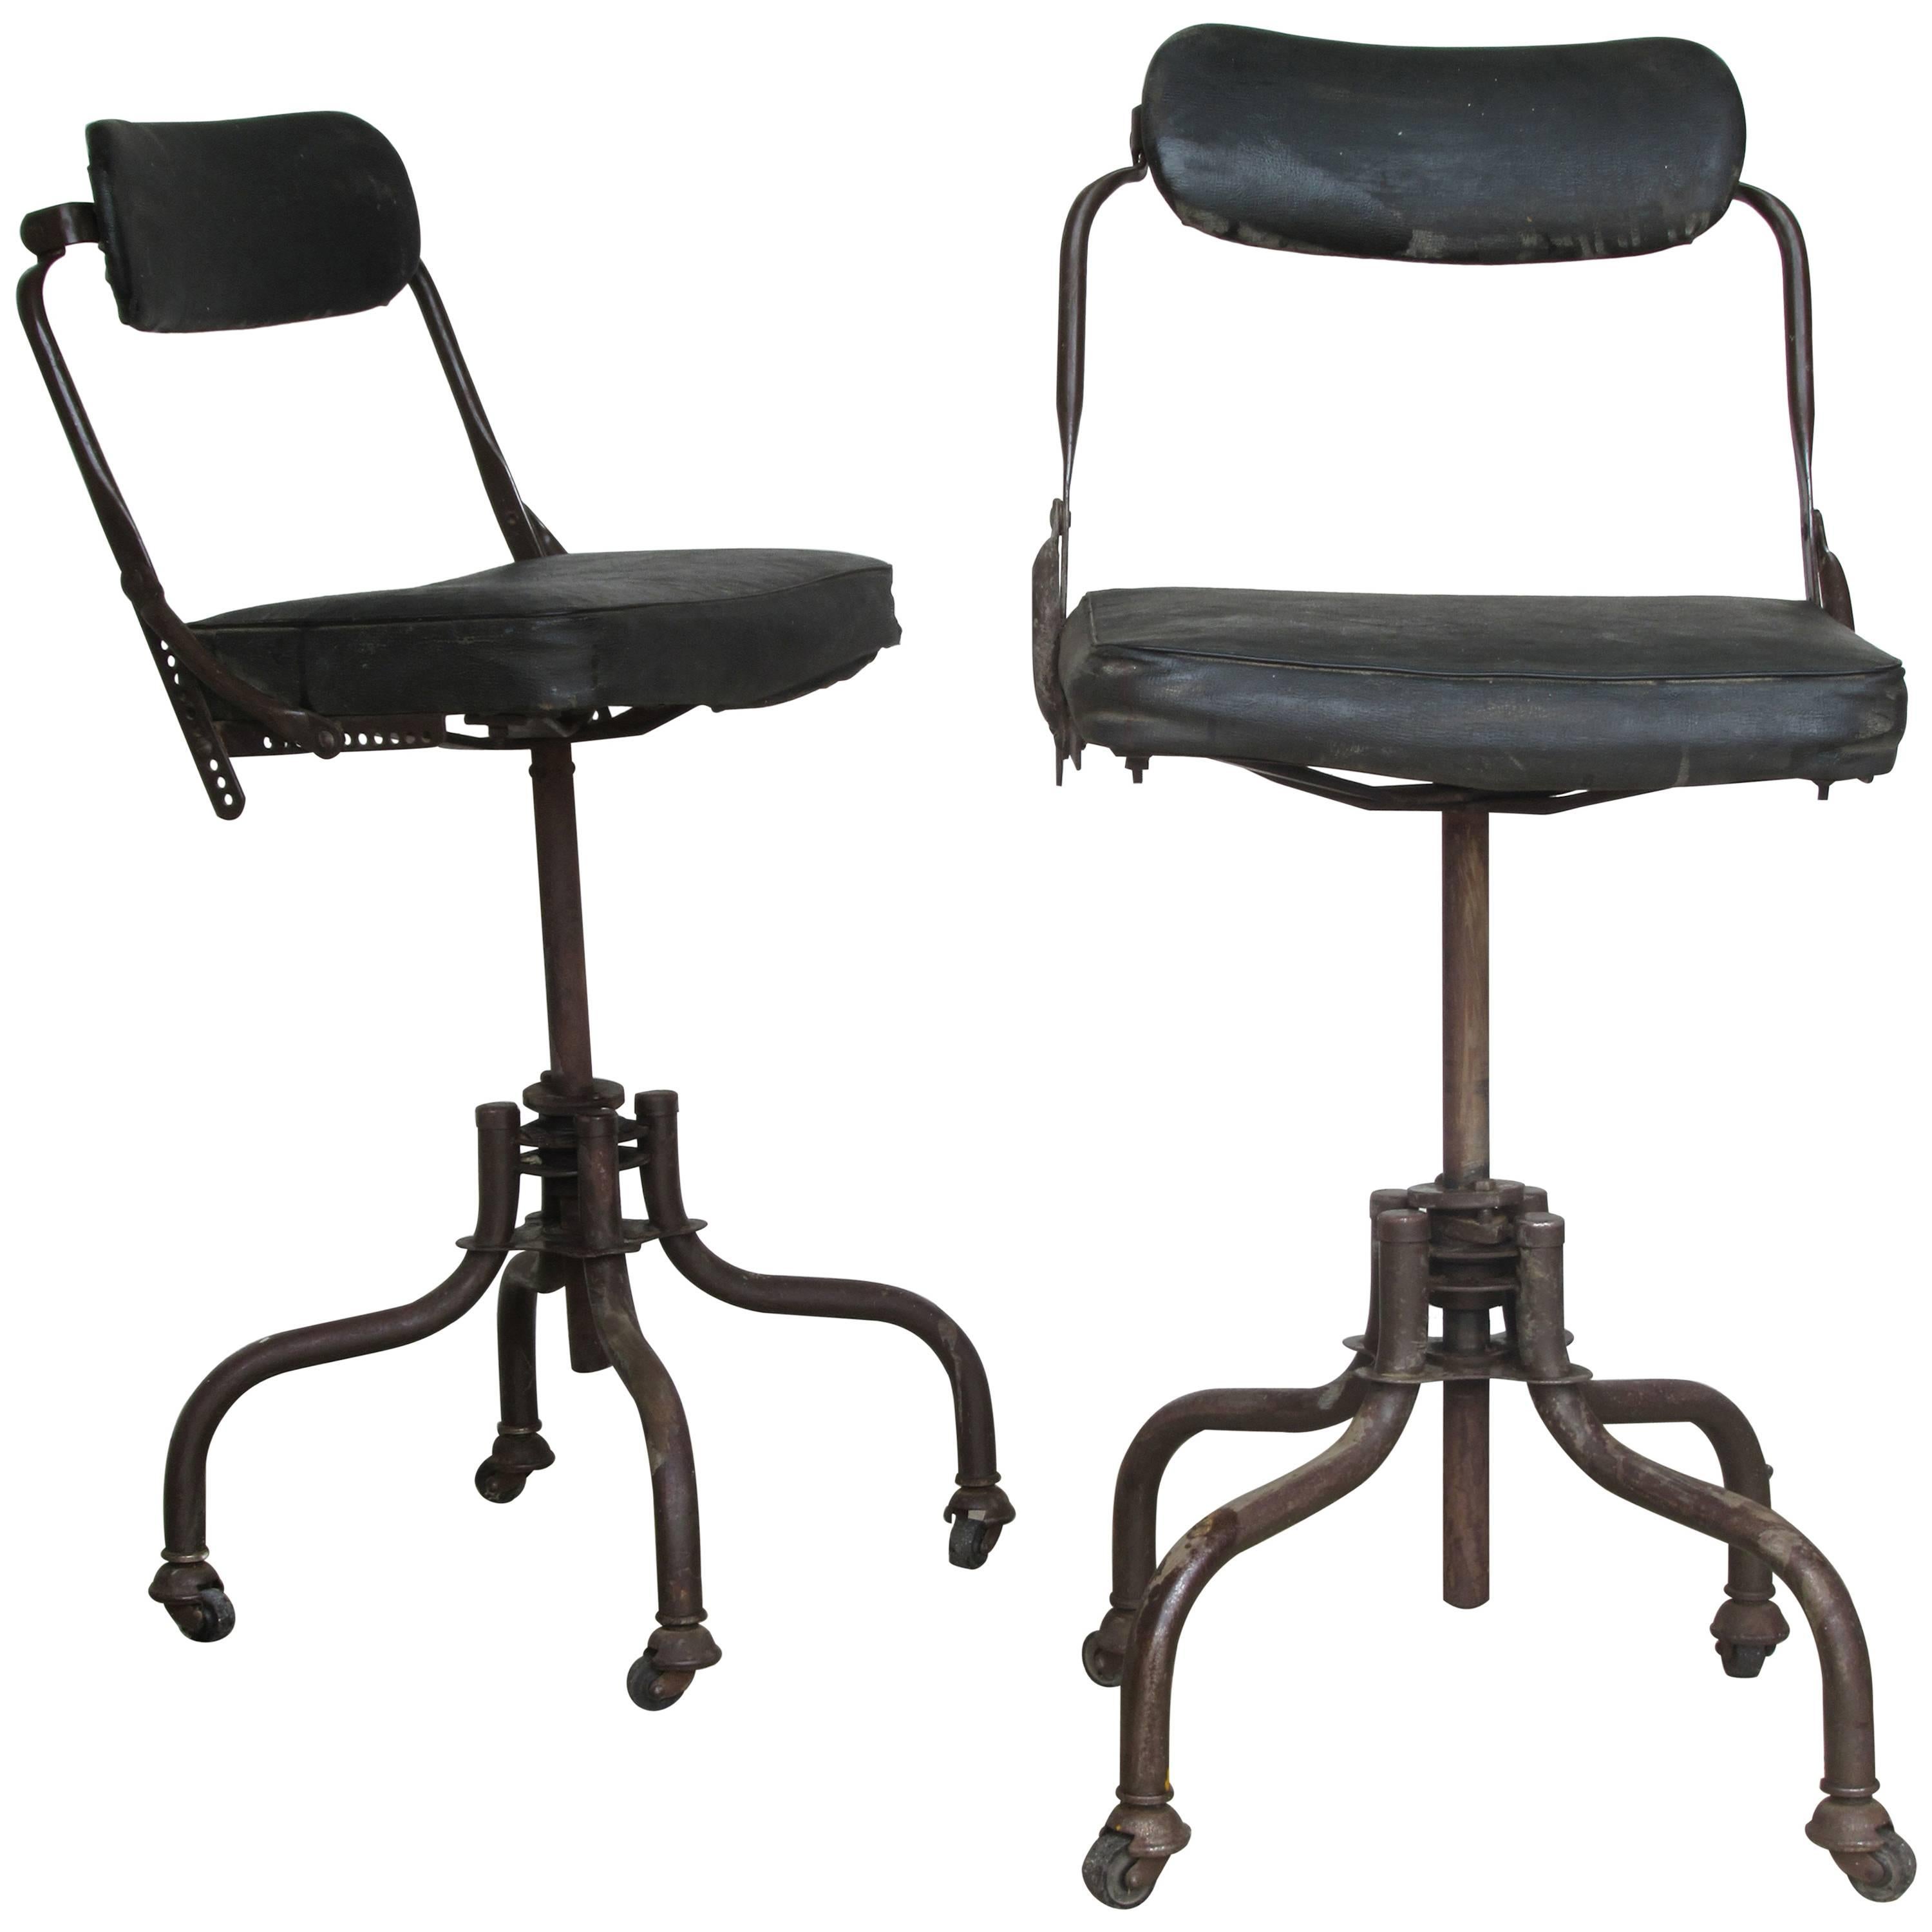 Early Industrial Task Chairs